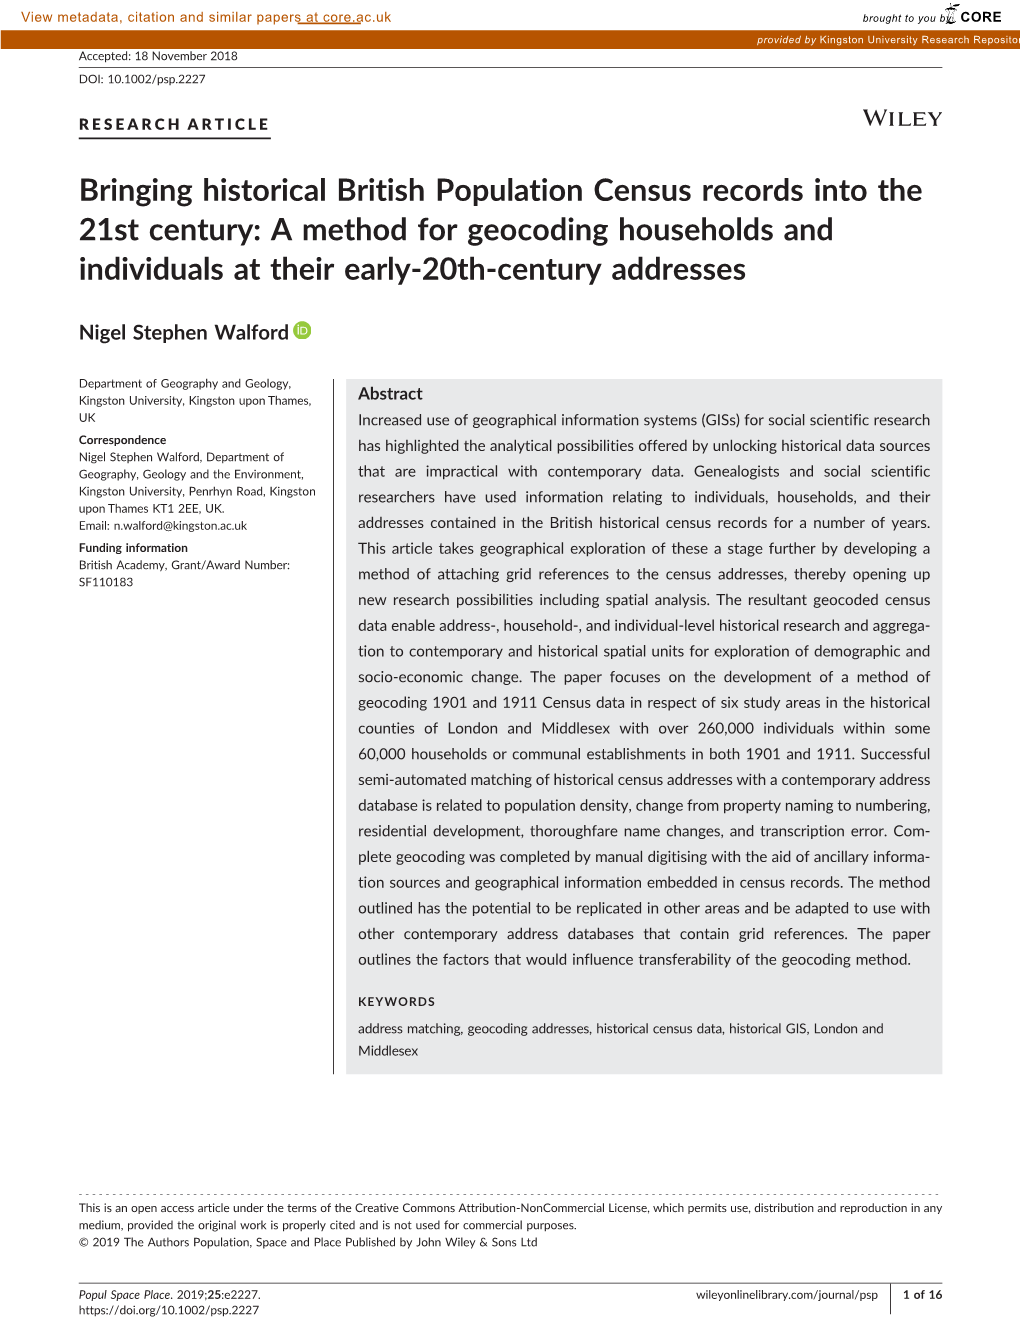 Bringing Historical British Population Census Records Into the 21St Century: a Method for Geocoding Households and Individuals at Their Early‐20Th‐Century Addresses